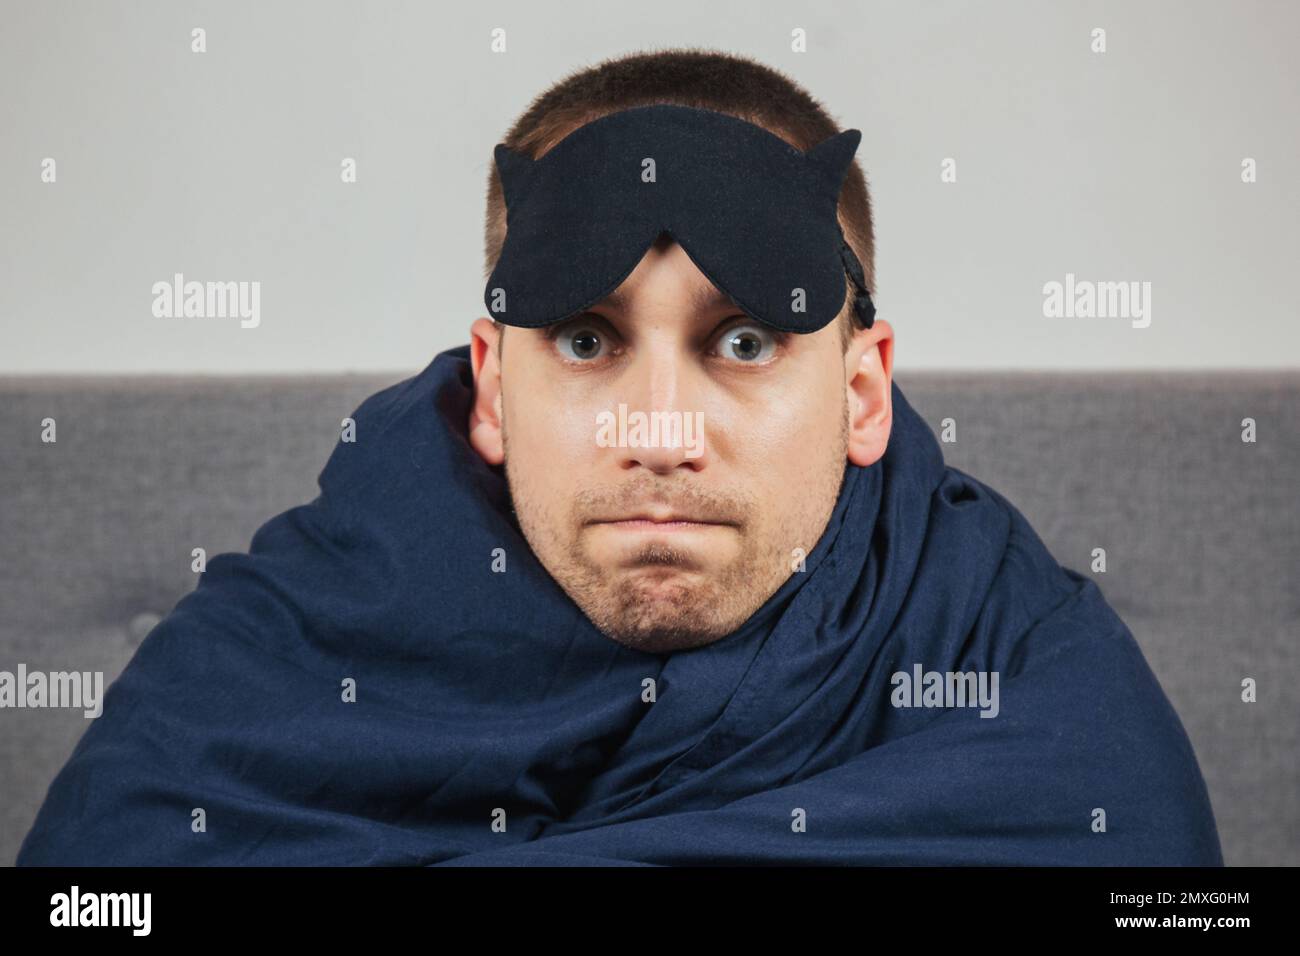 Embarrassed young man in a blanket at home wears a sleep mask while relaxing at home, studio portrait. Relax, lifestyle concept in a good mood Stock Photo